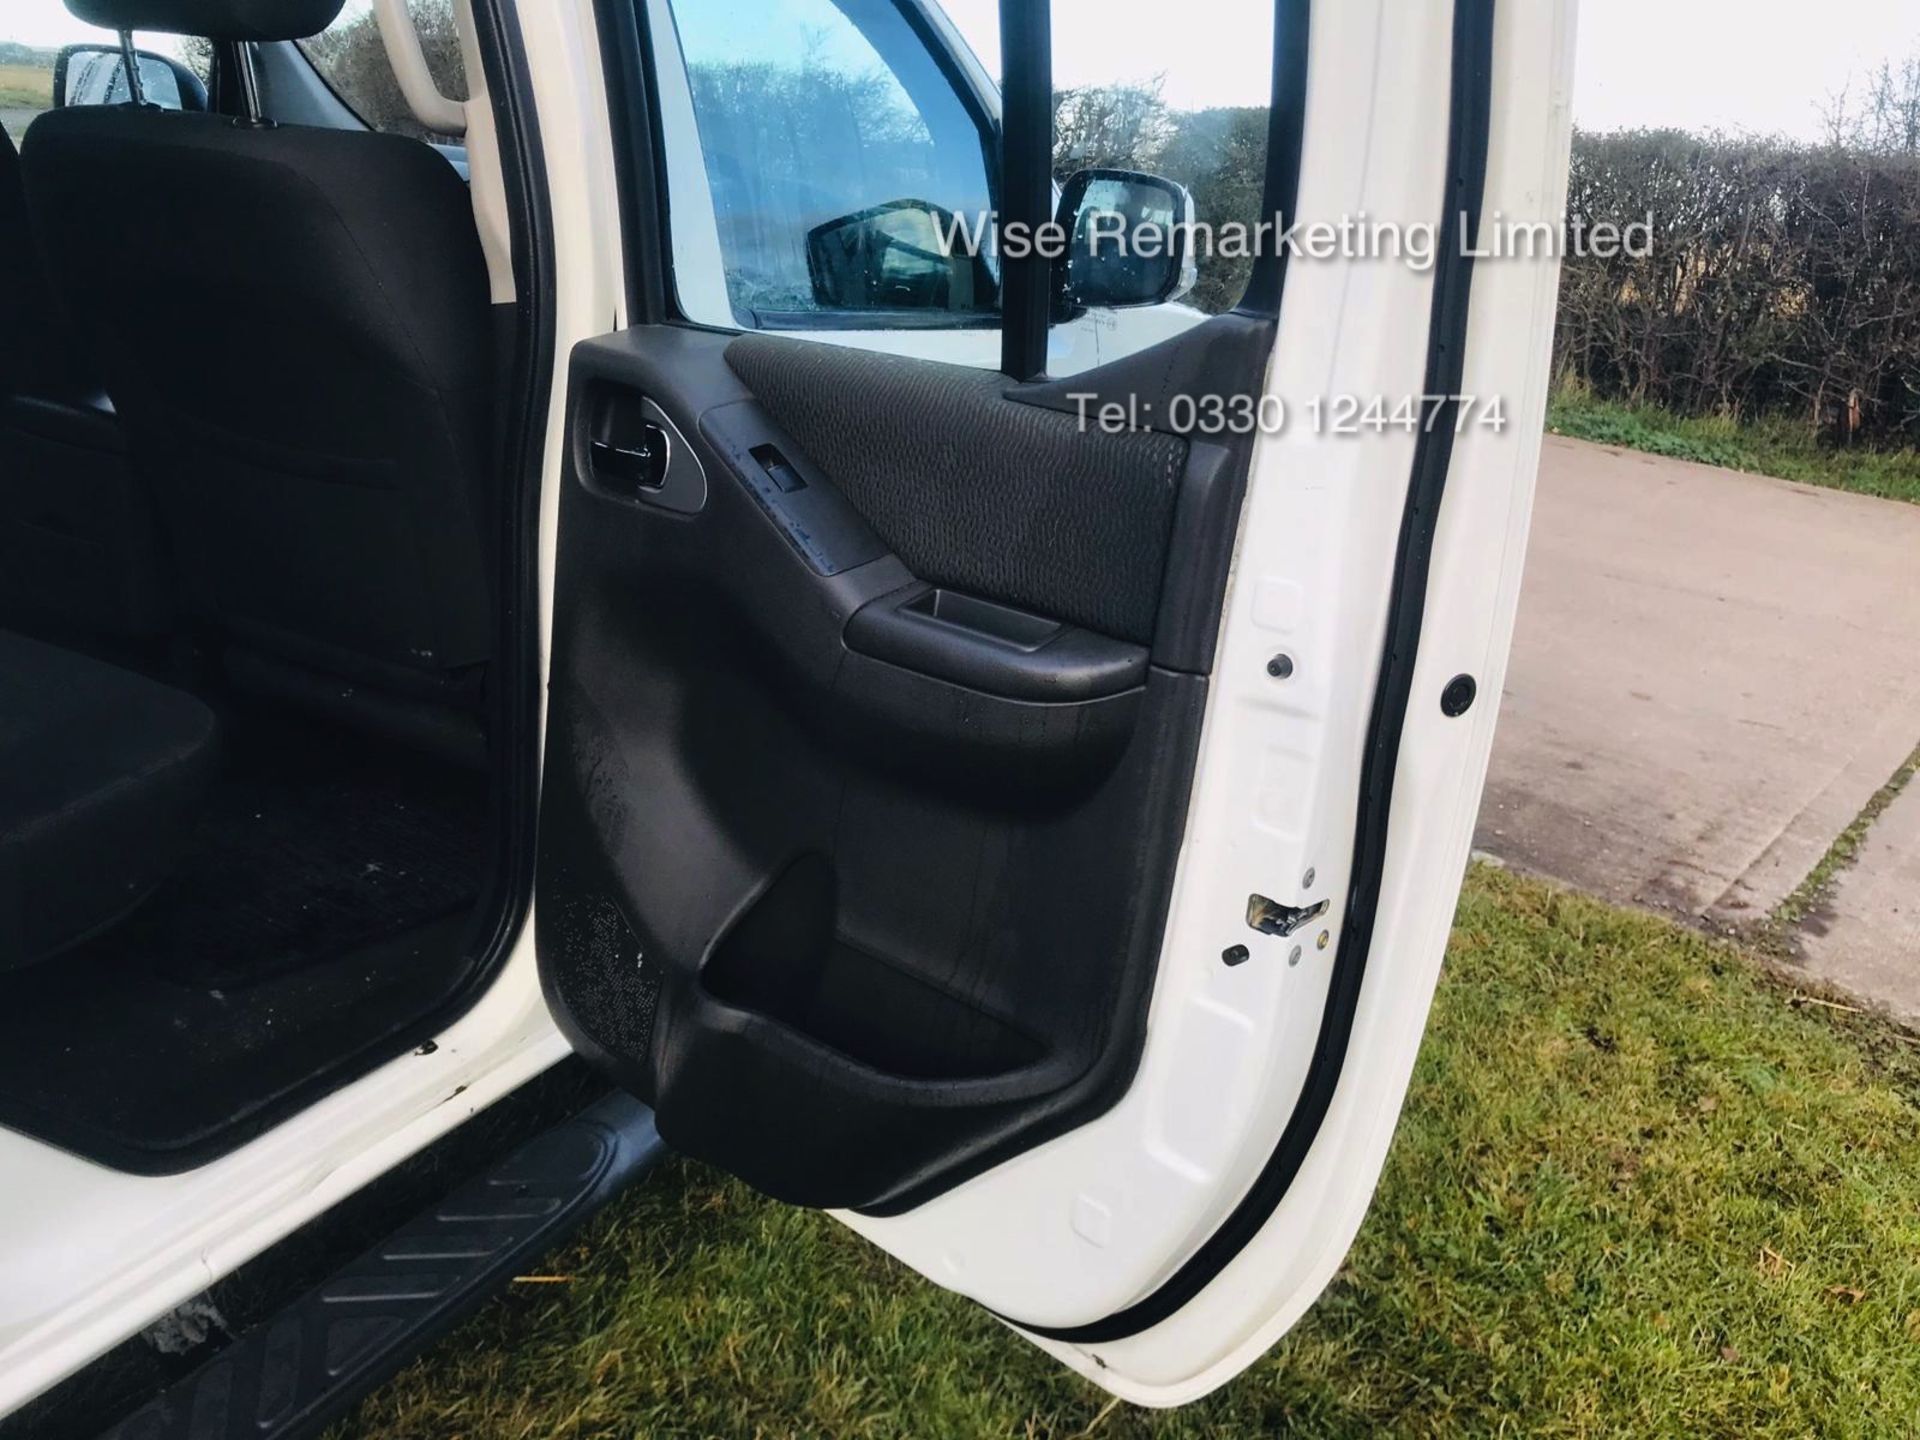 Nissan Navara Acentra 2.5 DCI - 2012 Model - Diamond White - 1 Keeper From New - Tow Bar - Image 18 of 20